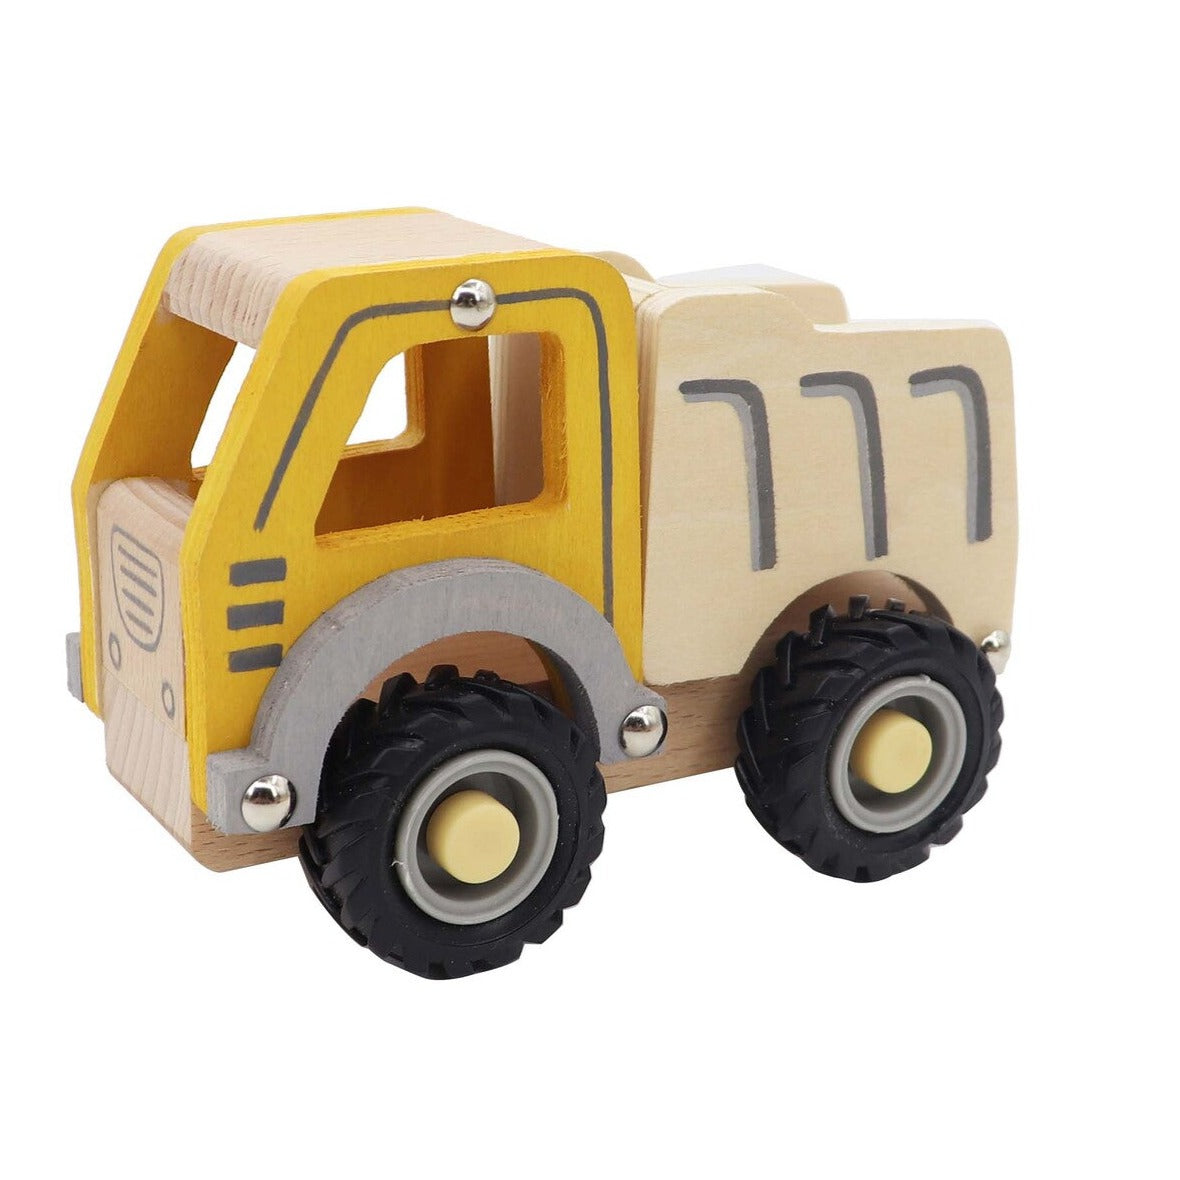 wooden toy dump truck - angus and dudley